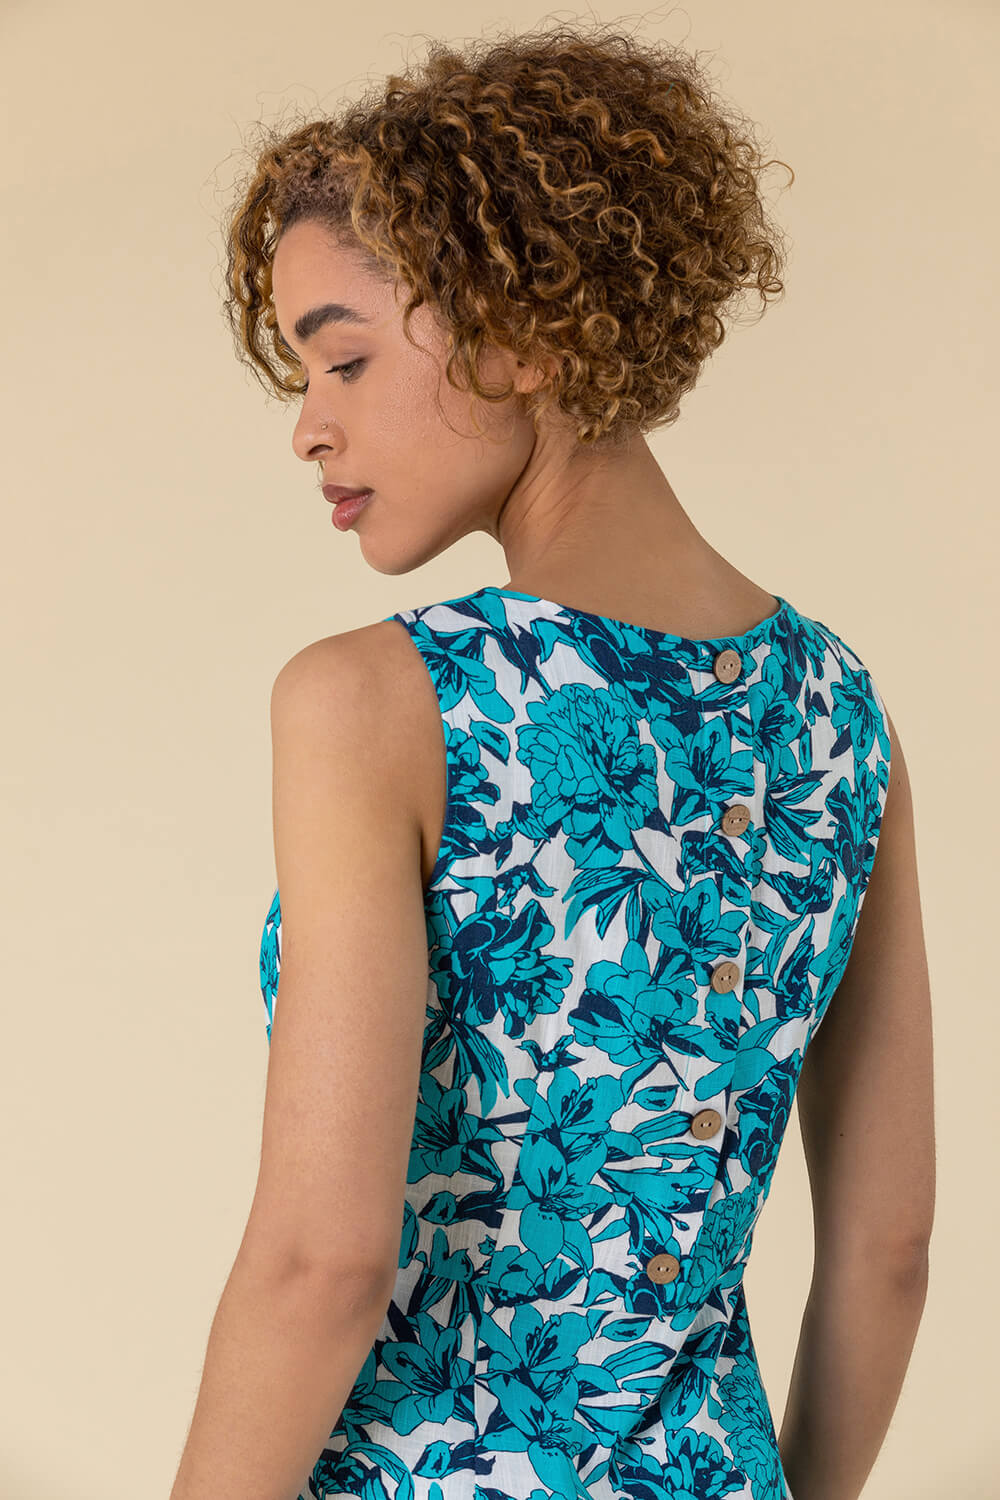 Turquoise Back Button Floral Print Dress, Image 5 of 5